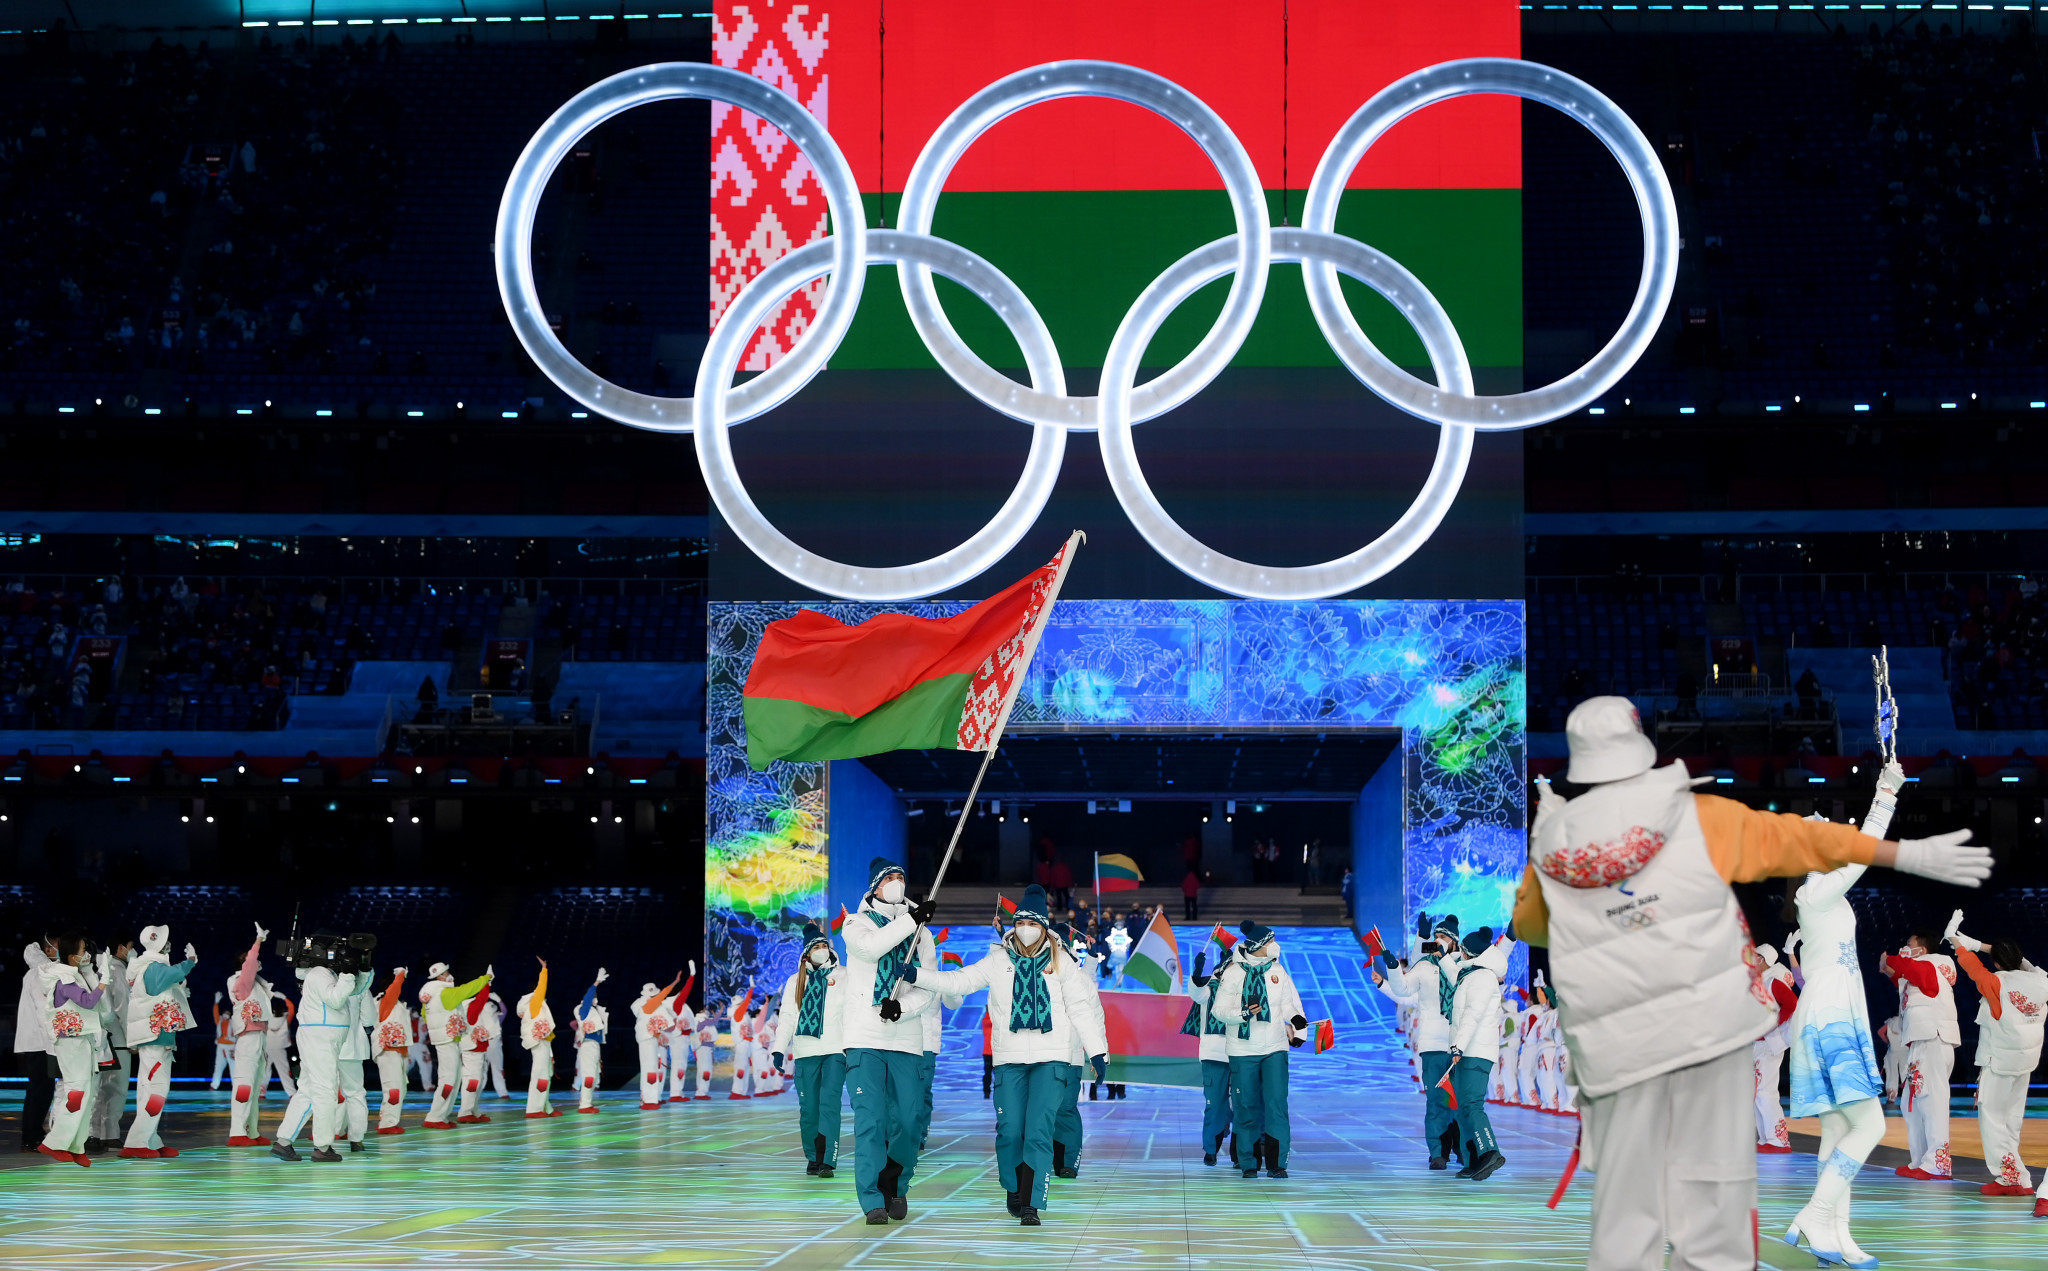 International Olympic Committee recommendations on the non-participation of Russian and Belarusian athletes in international sport were introduced shortly after the Beijing 2022 Winter Olympics  ©Getty Images